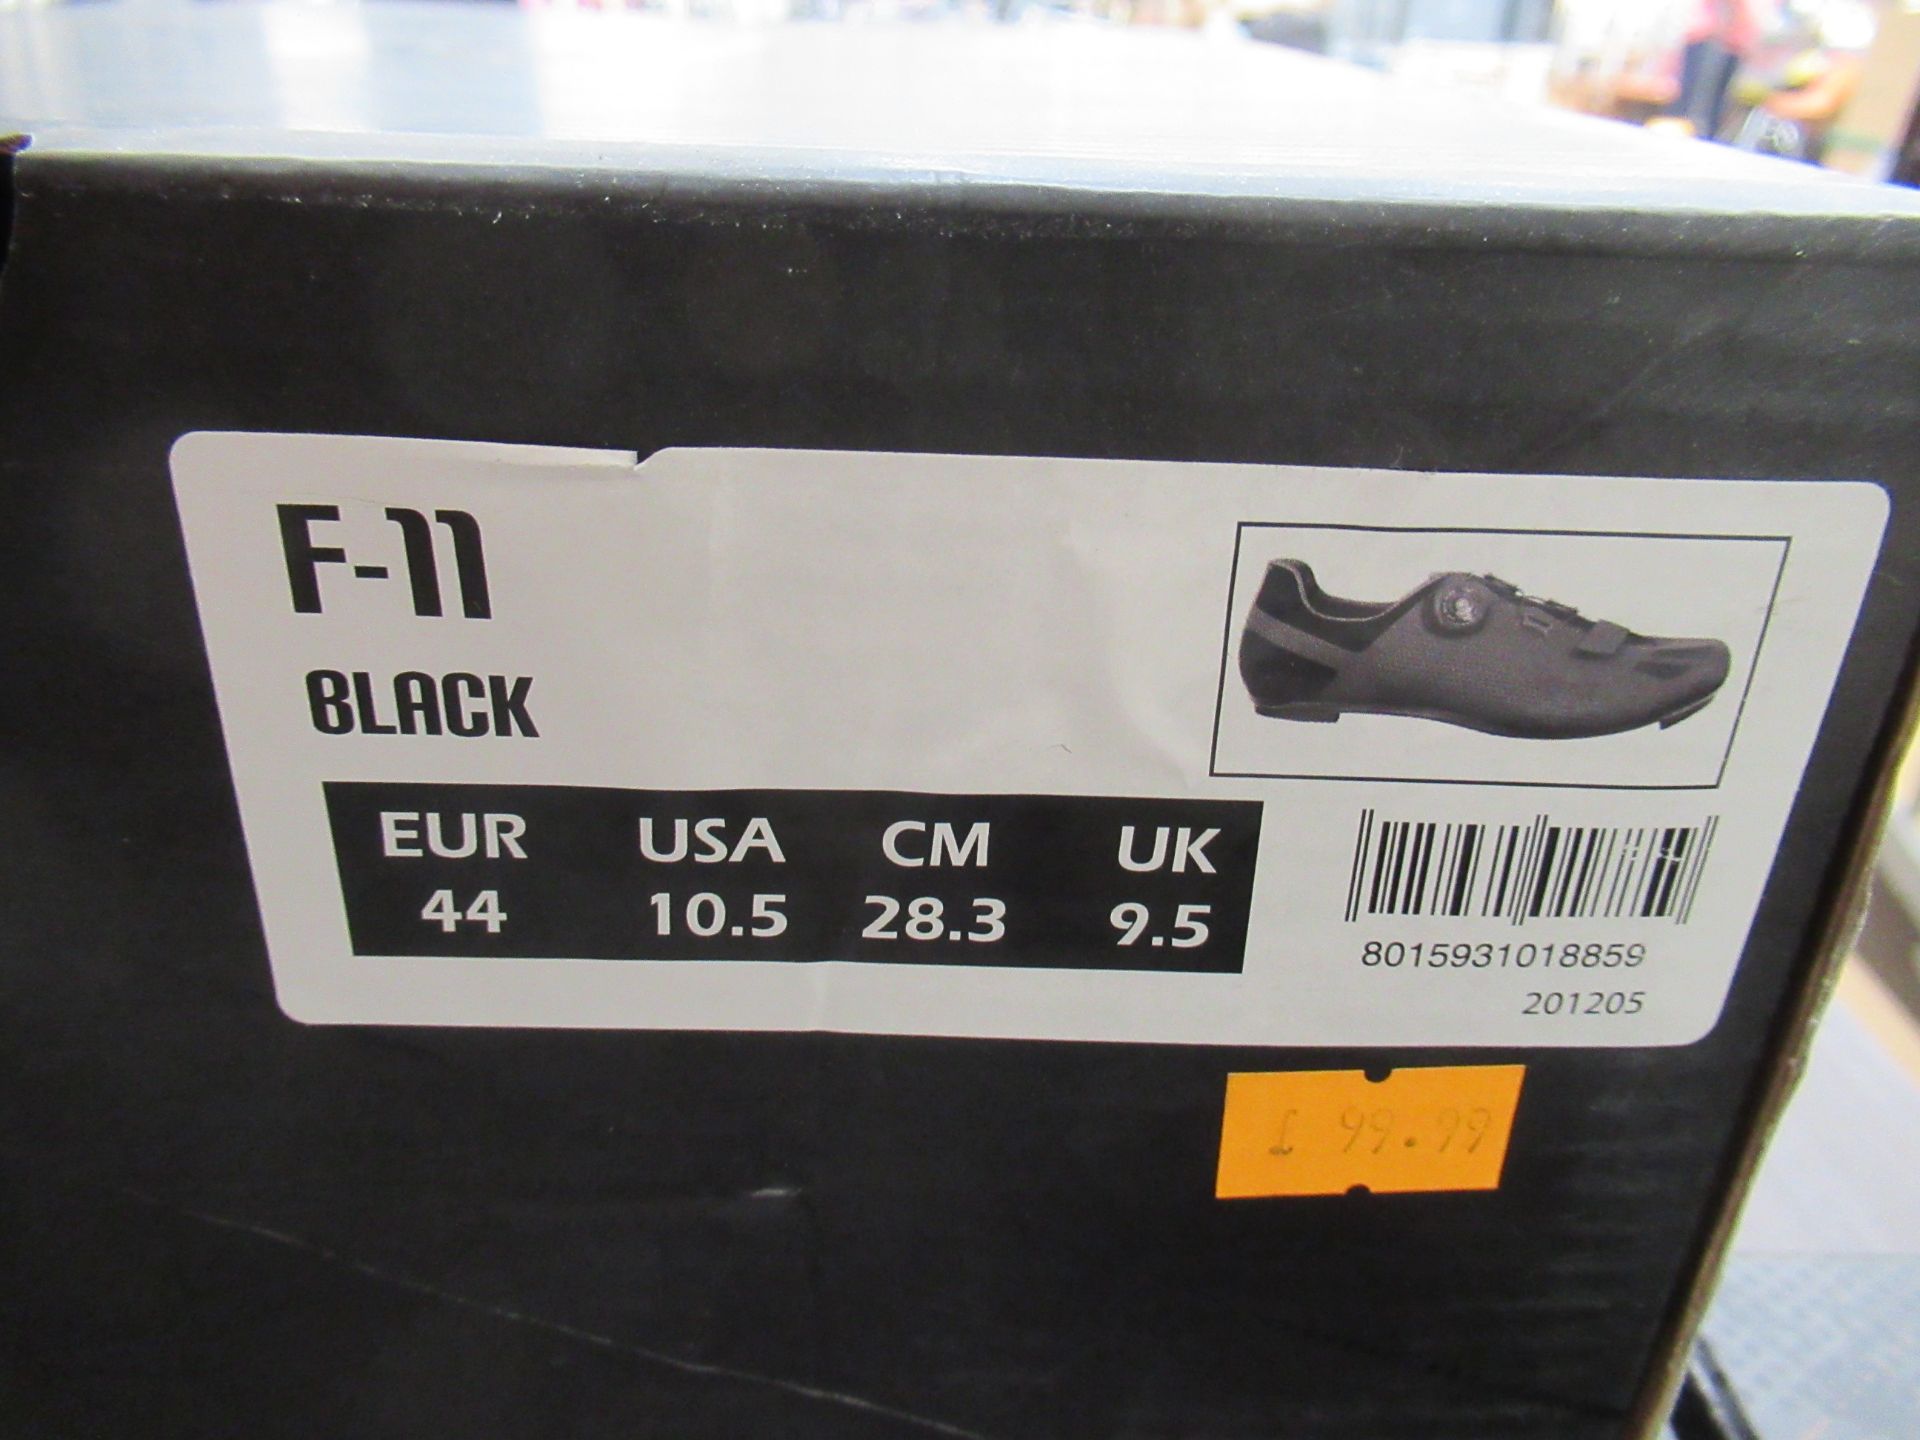 3 x Pairs of FLR cycling shoes - 1 x Bushmaster boxed EU size 41 (RRP£79.99); 1 x F-11 boxed EU size - Image 5 of 10